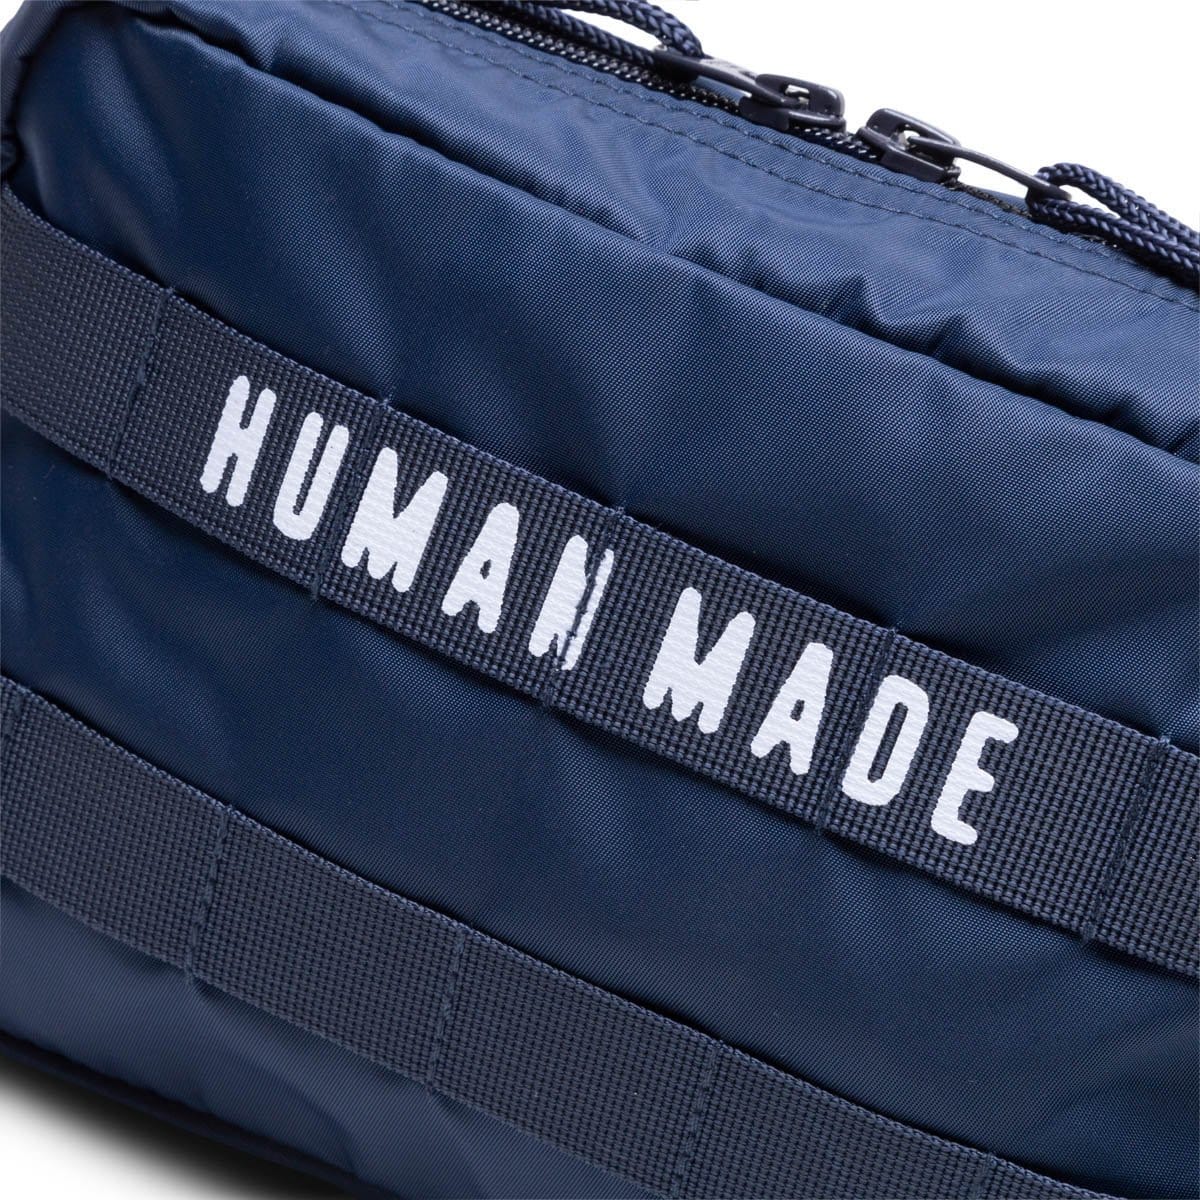 Human Made Bags NAVY / O/S MILITARY POUCH #1